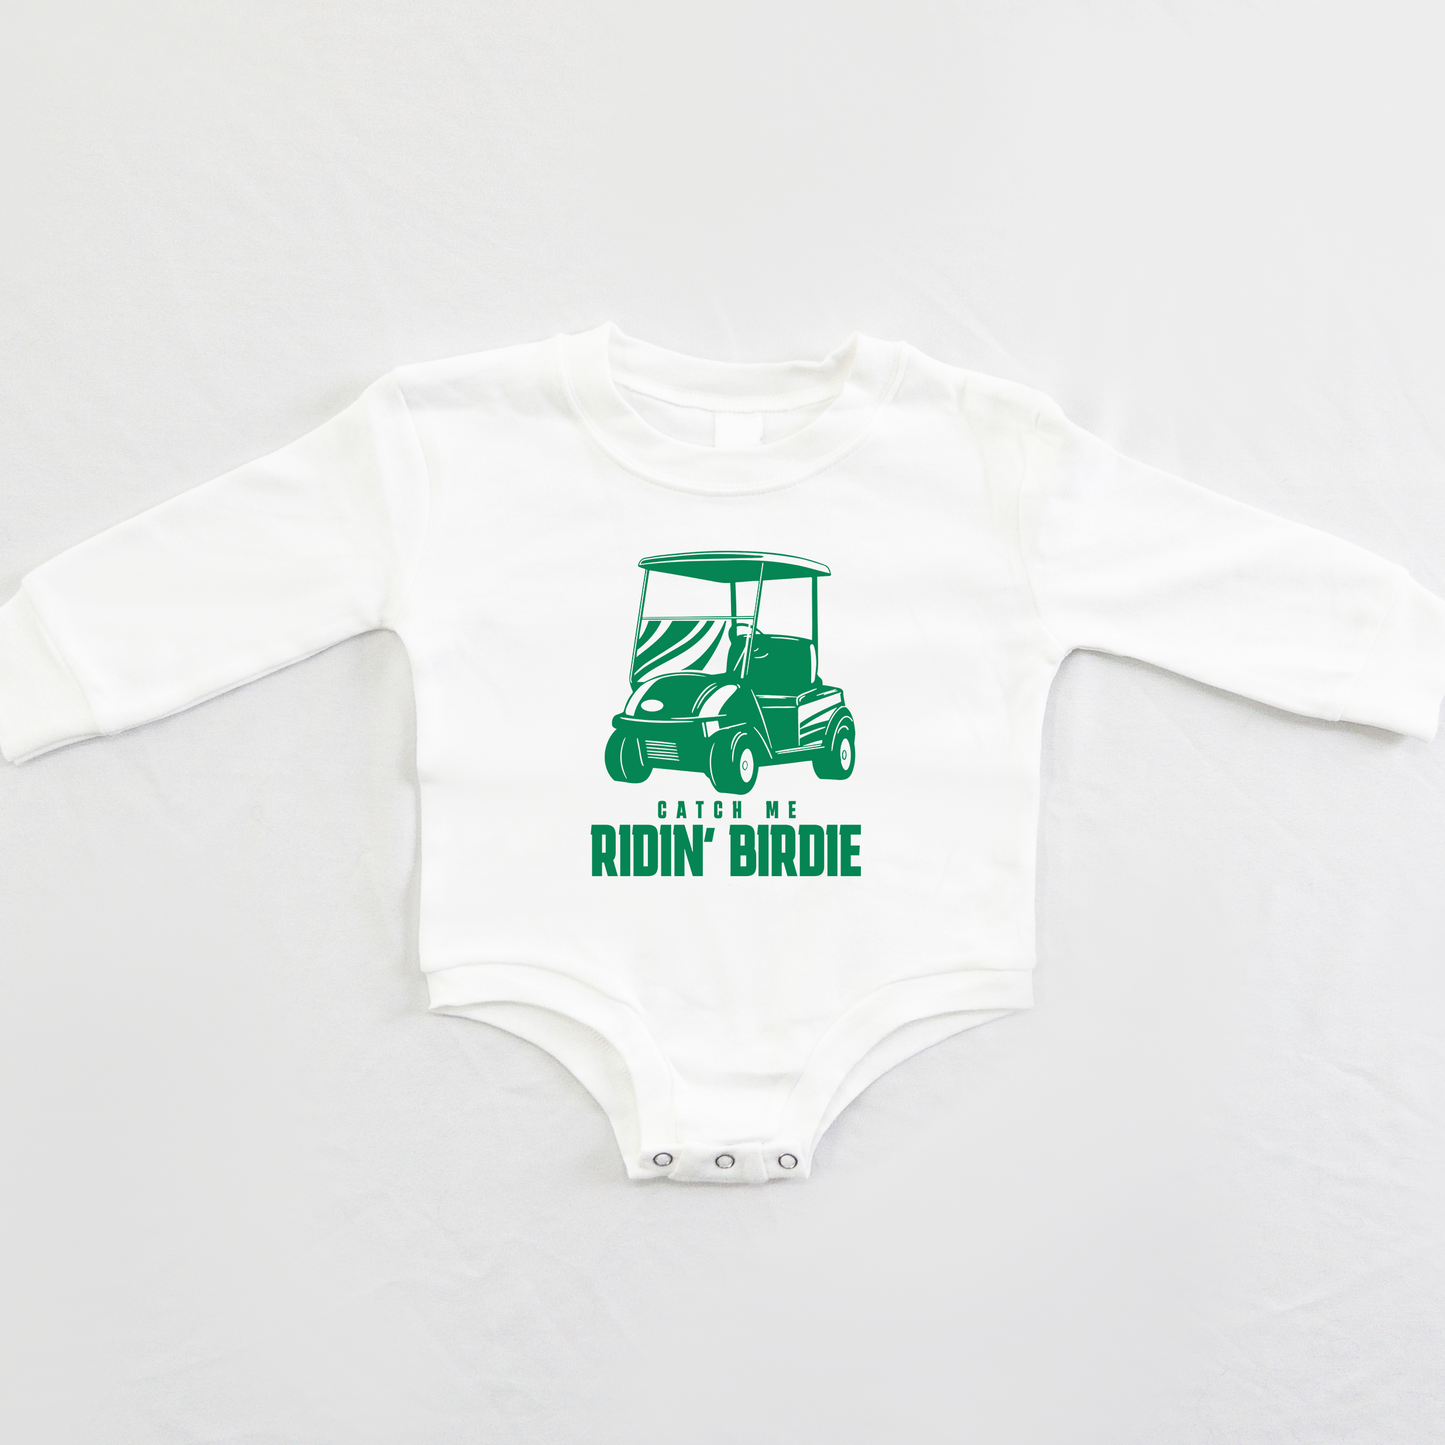 Catch Me Ridin' Birdie Funny Golf Shirt Kids Toddler Youth T-Shirt or Baby Bodysuit